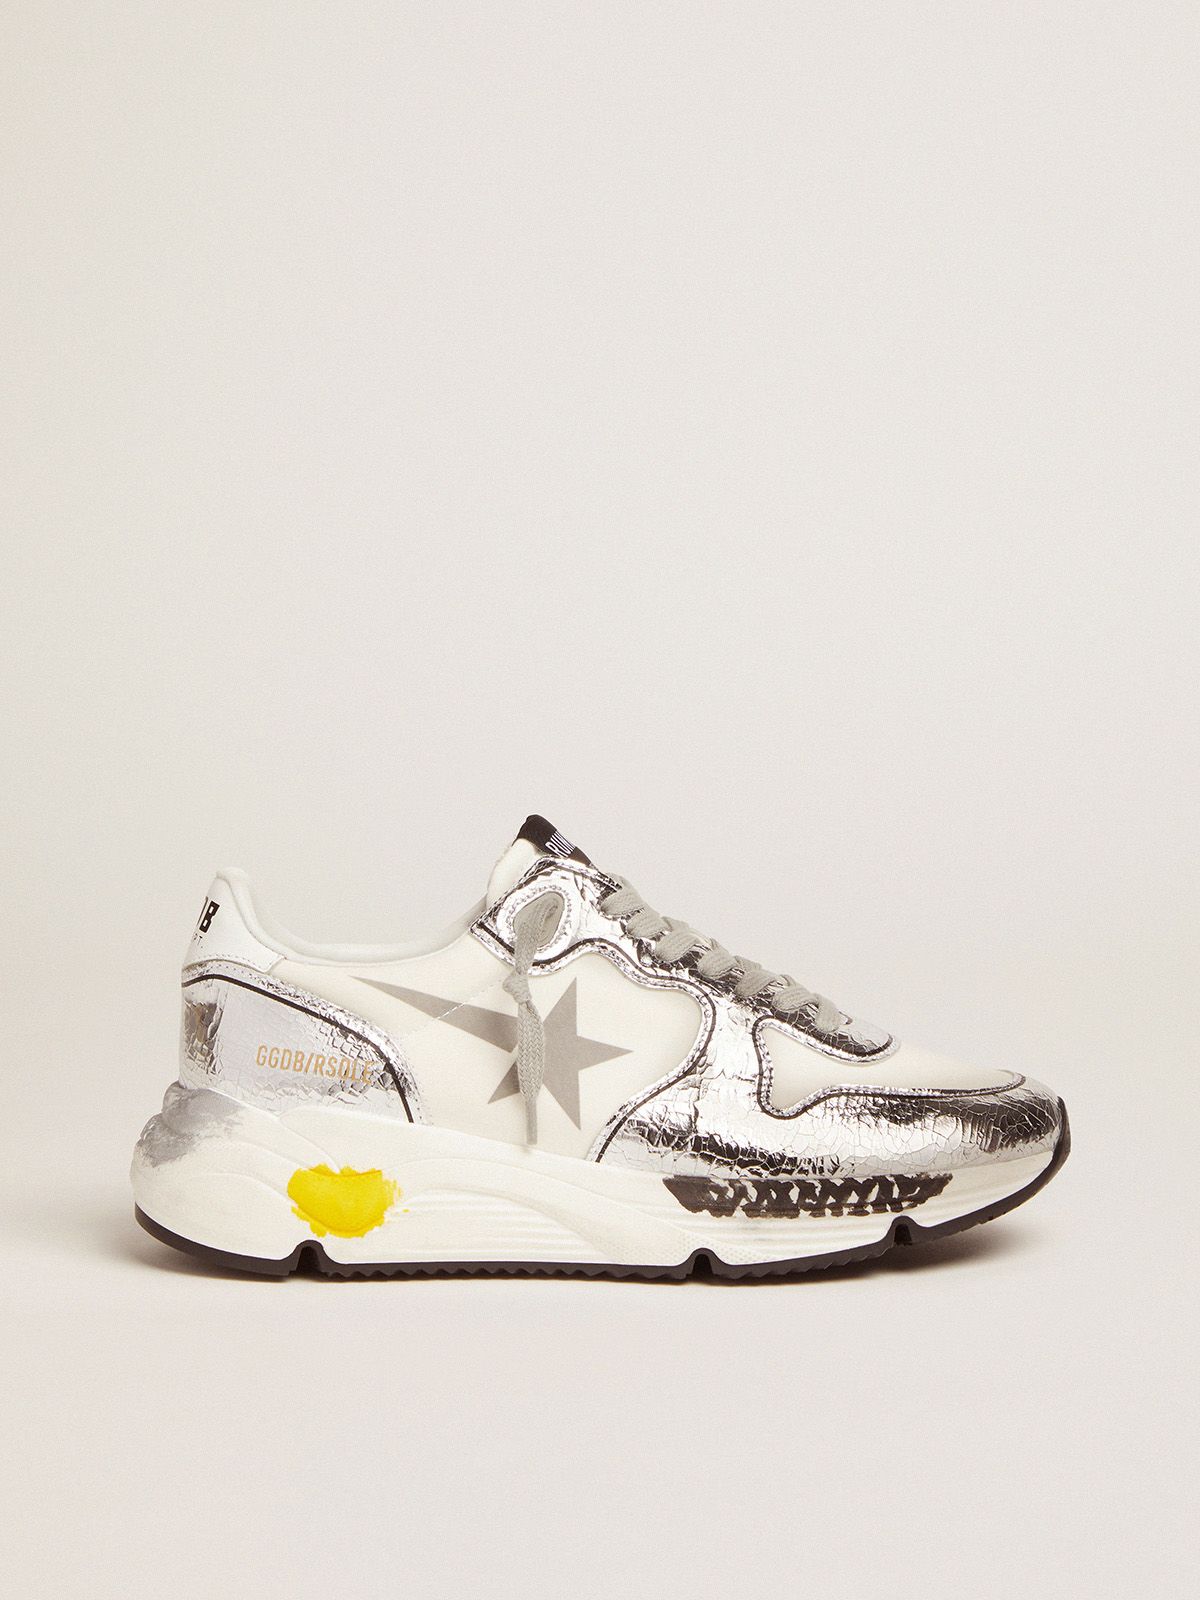 Golden Goose Ball Star Uomo Silver and white Running Sole sneakers